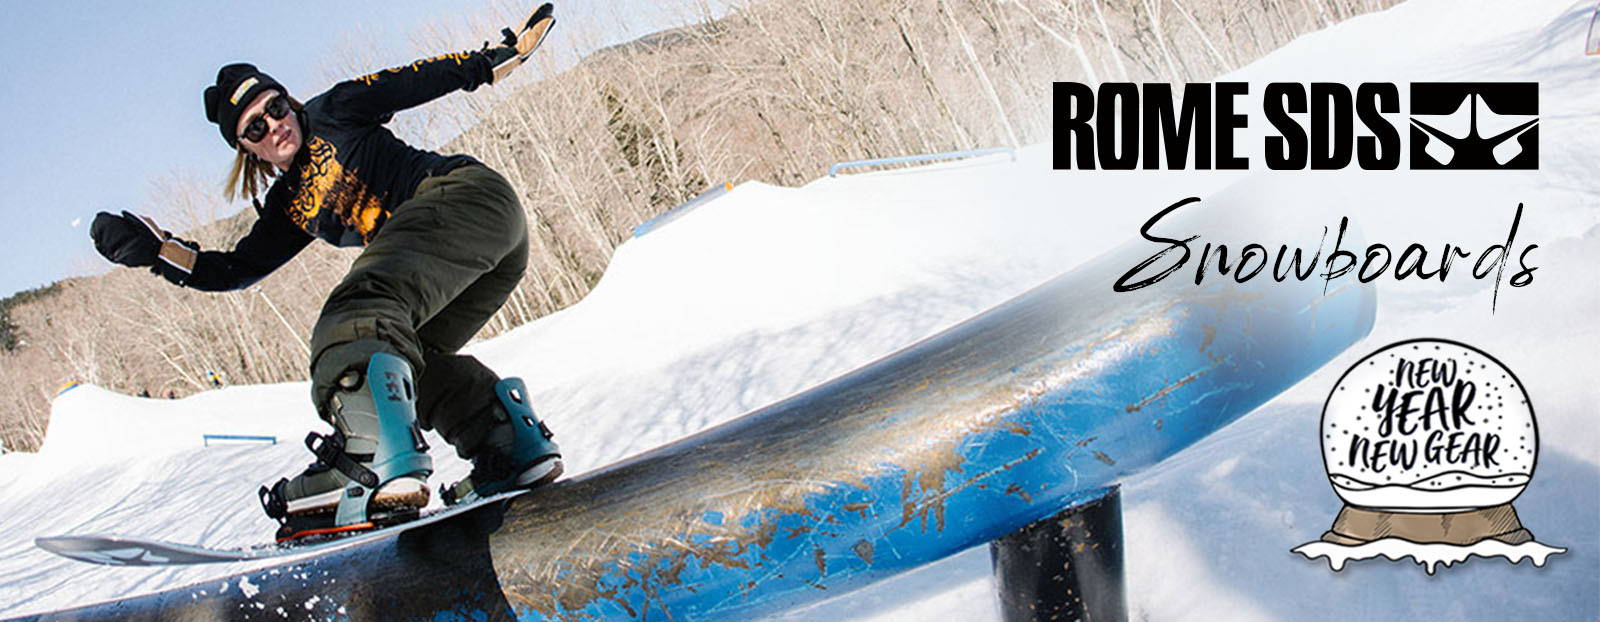 new year new gear- rome sds snowboards